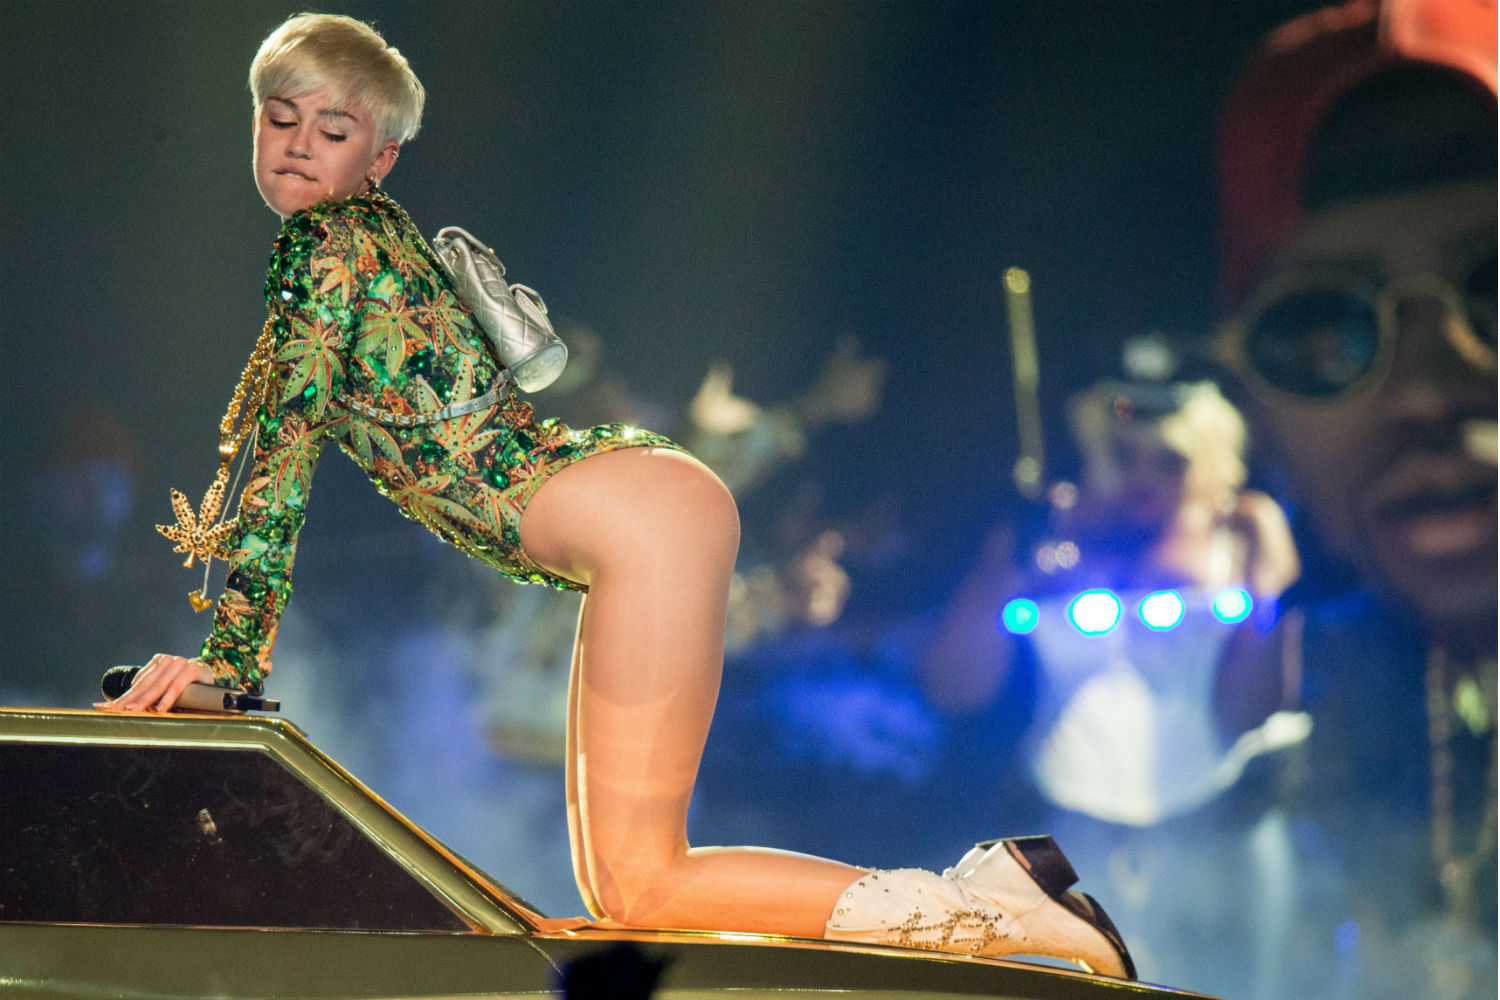 Miley Cyrus loves her sparkly marijuana leotard. (Photo by Christopher Polk/Getty Images)